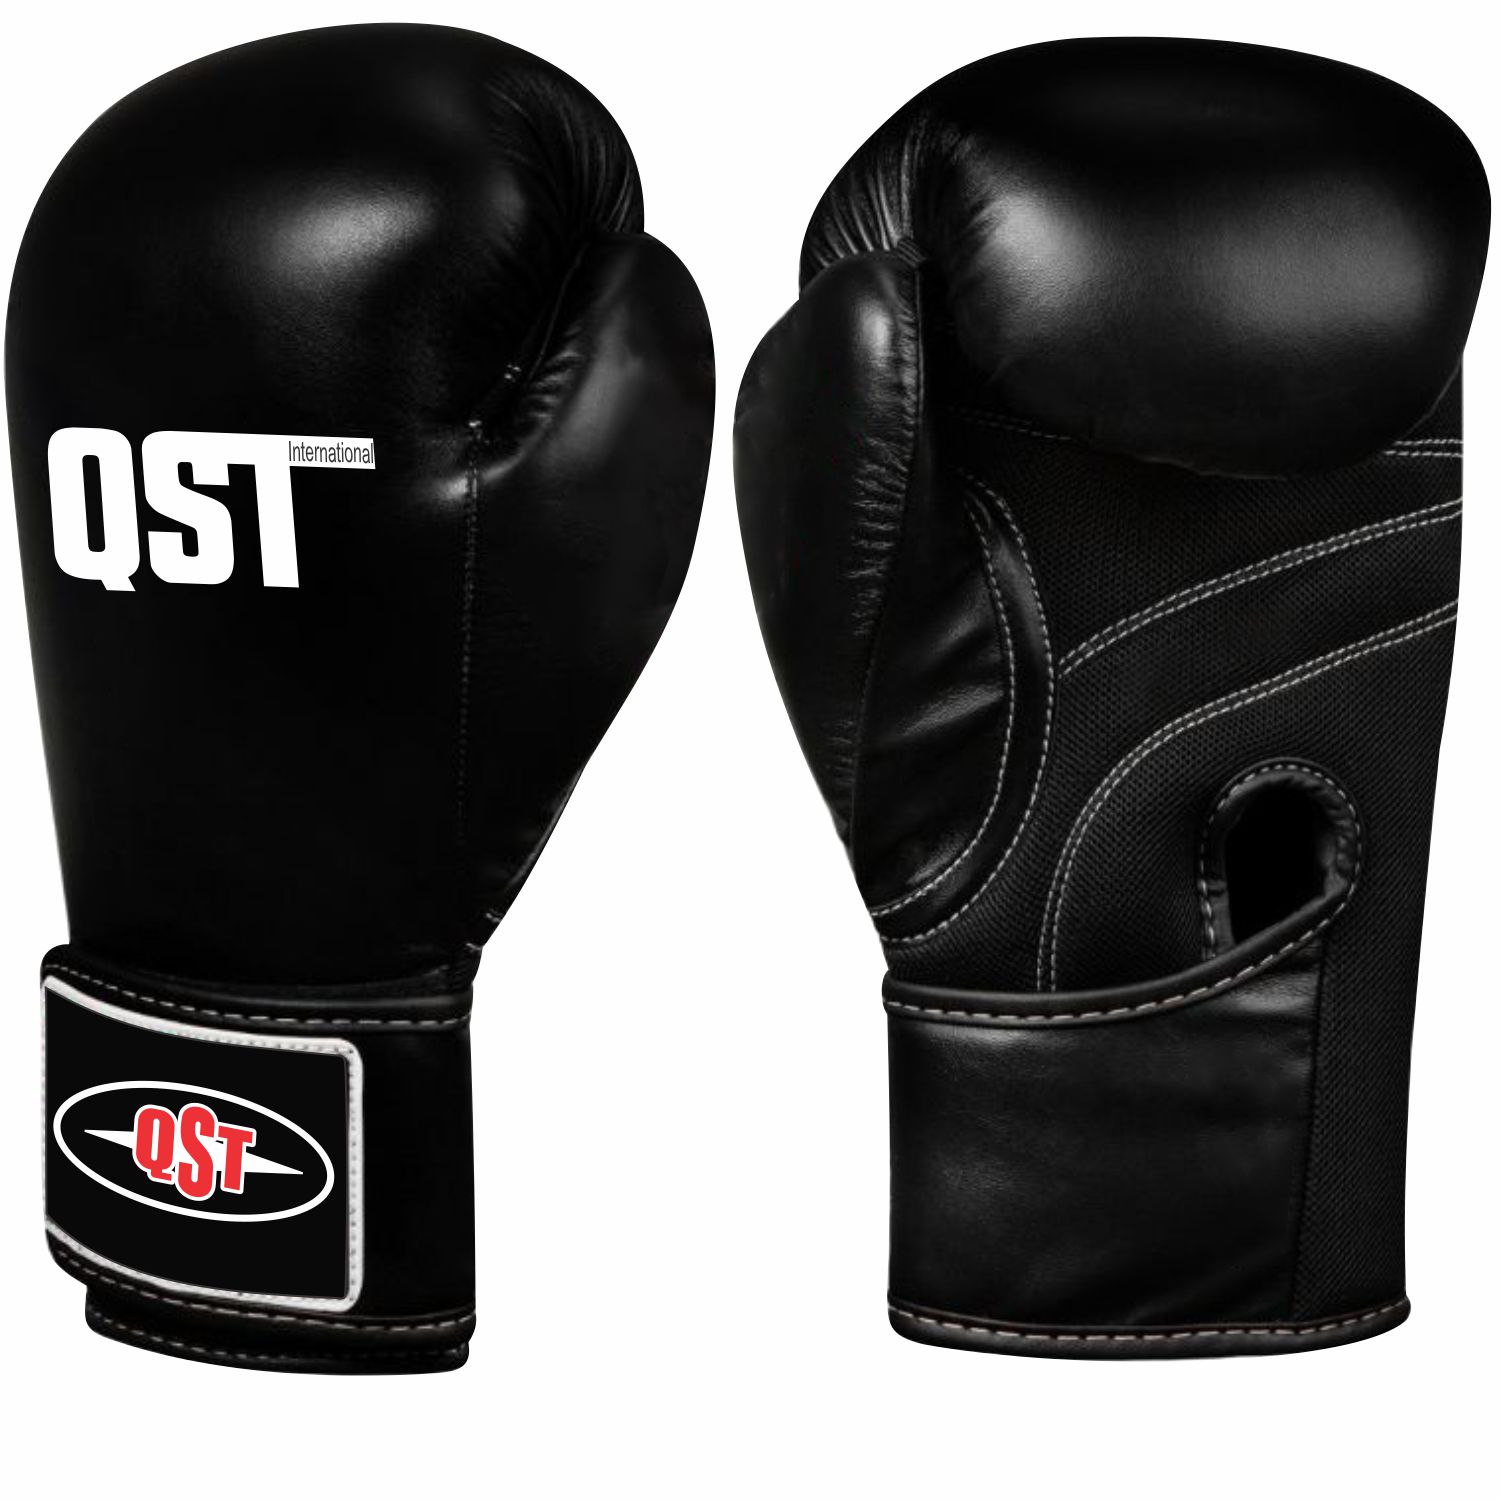 Professional Boxing Gloves - PRG-1527